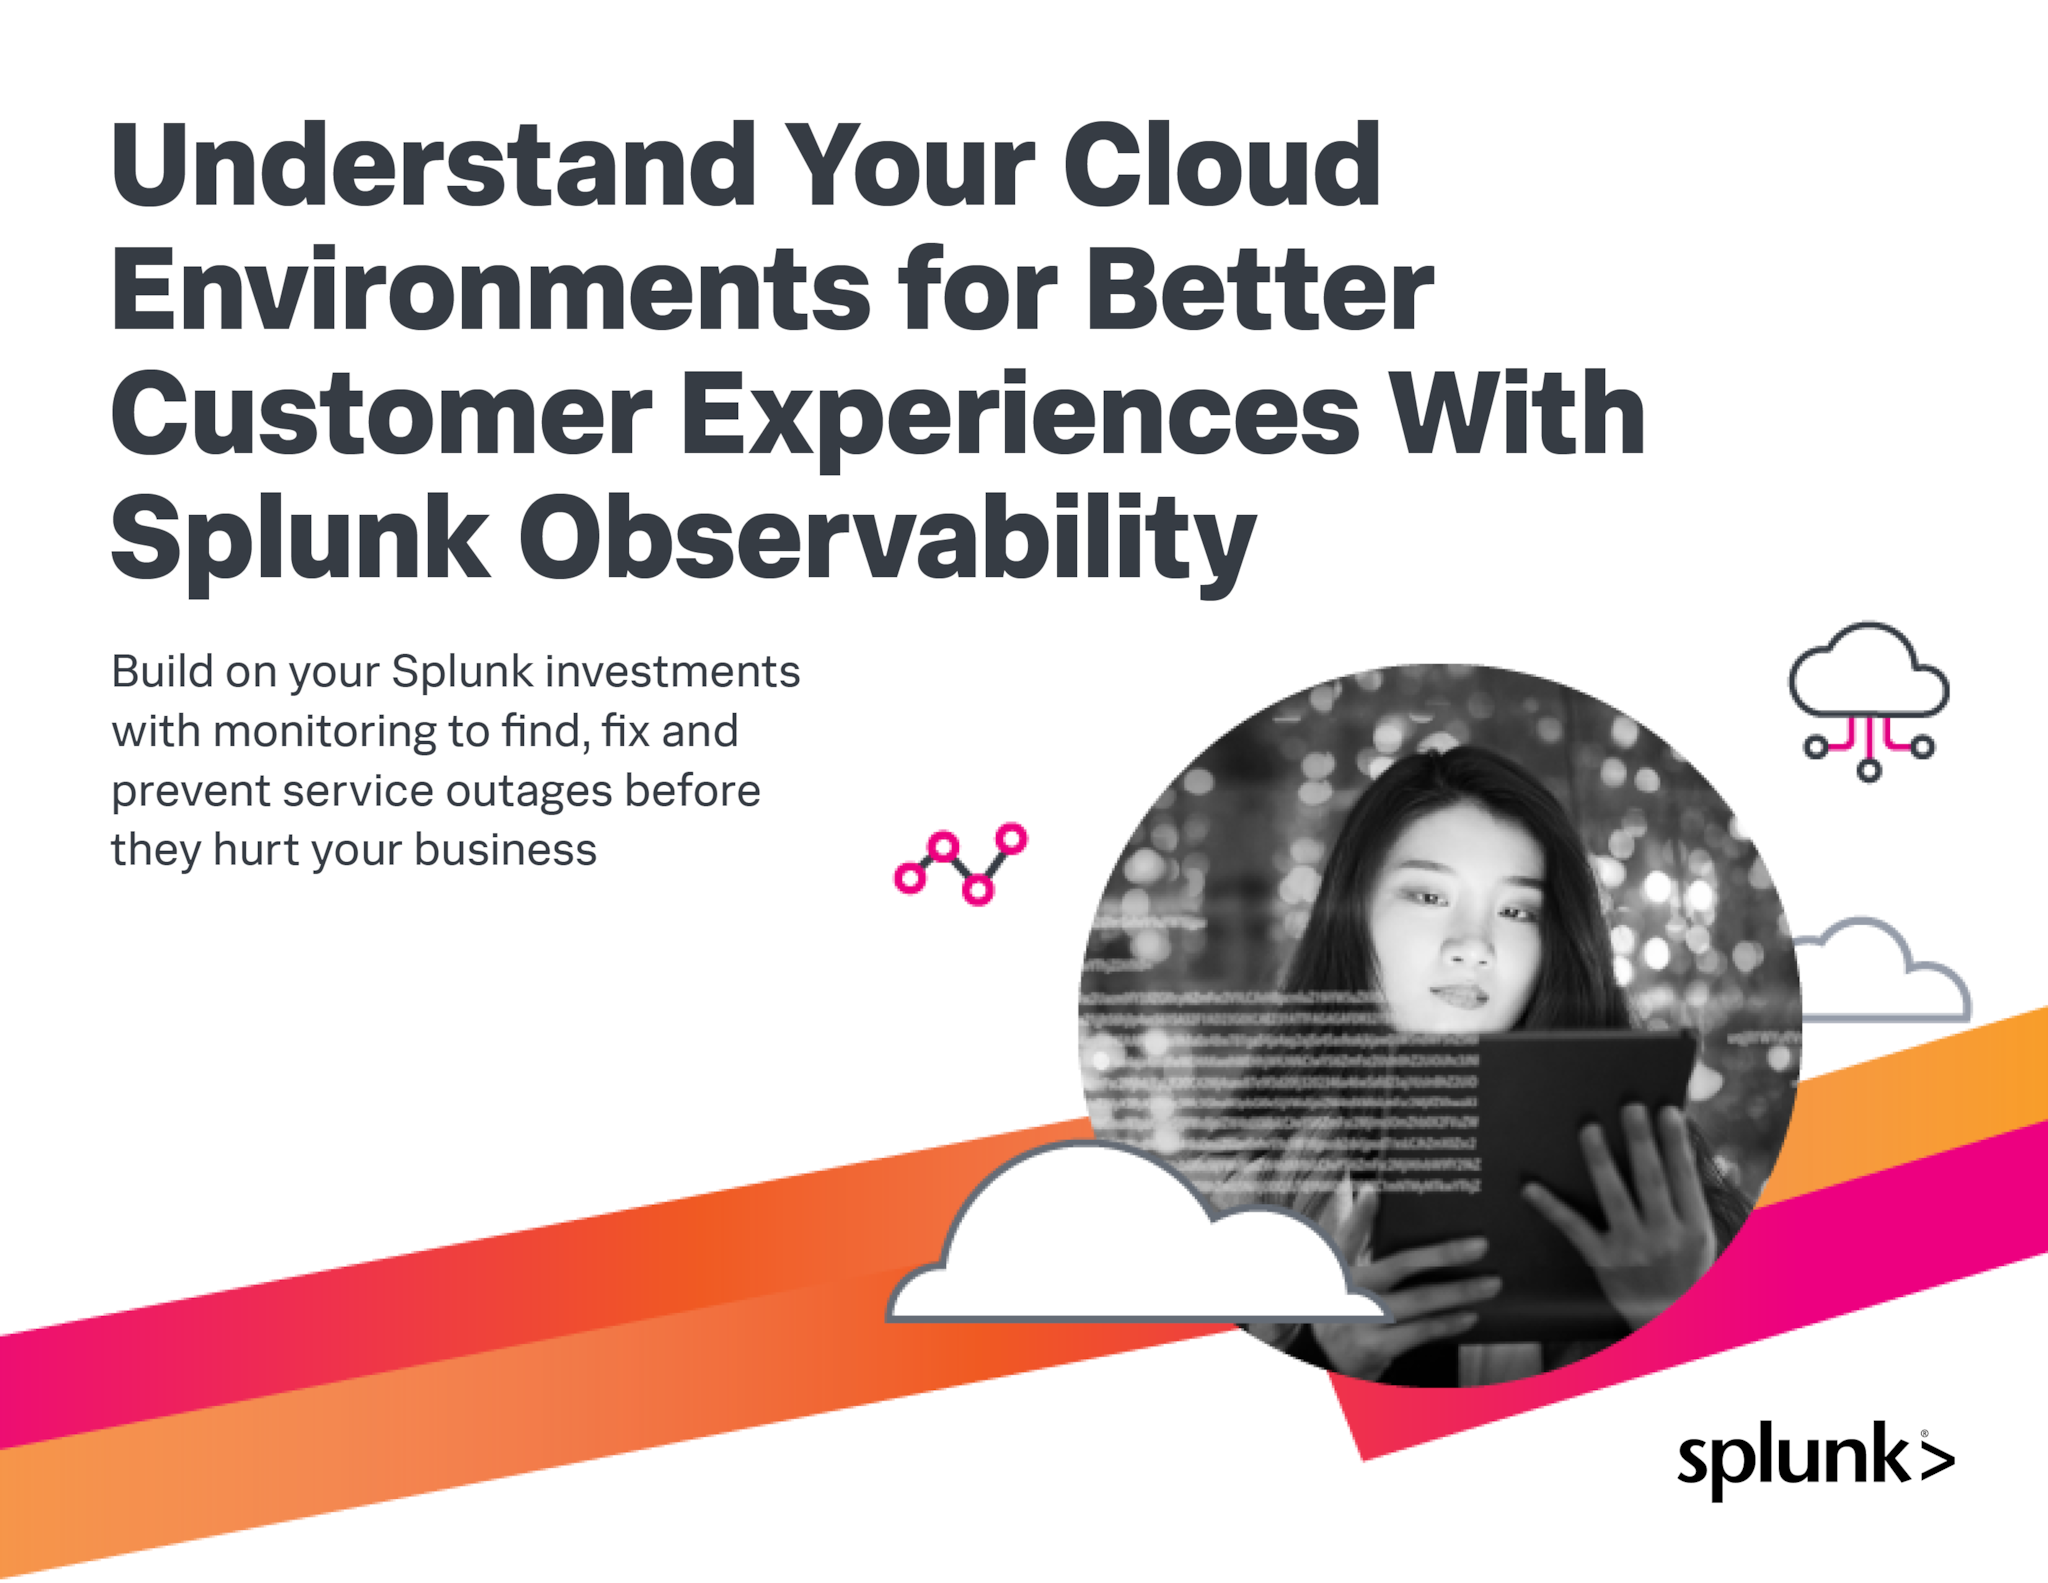 Understand Your Cloud Environments With Splunk Observability